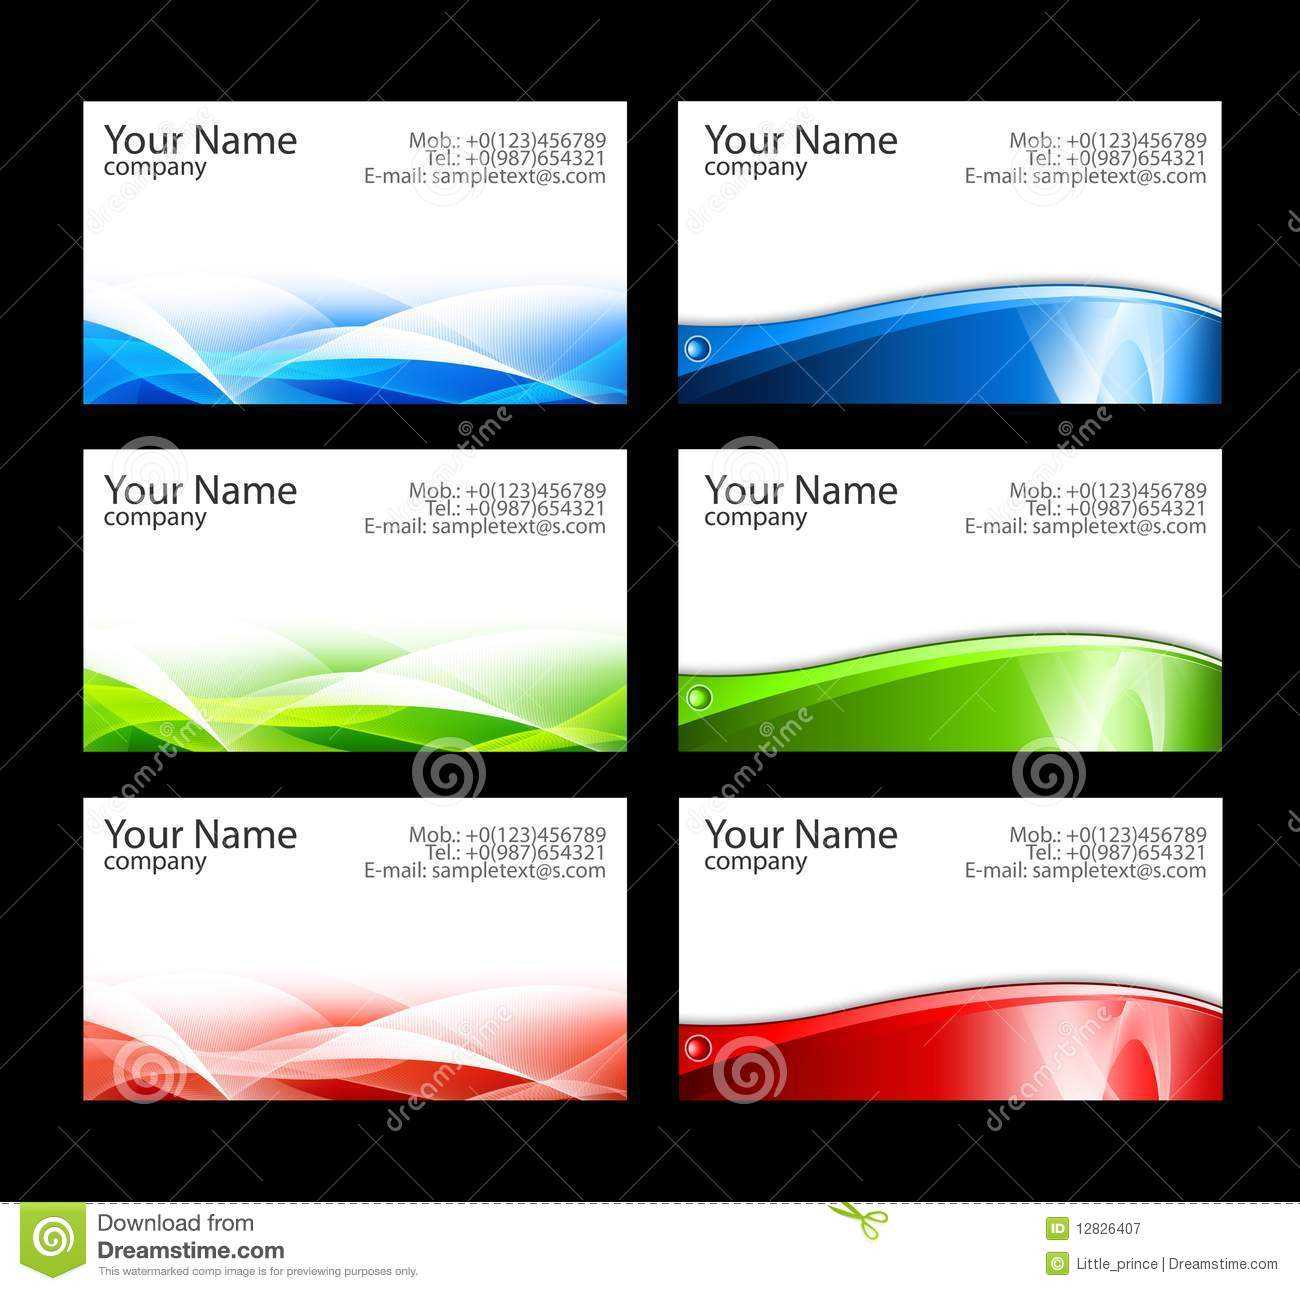 15 Free Avery Business Card Templates Images – Free Business With Free Business Cards Templates For Word